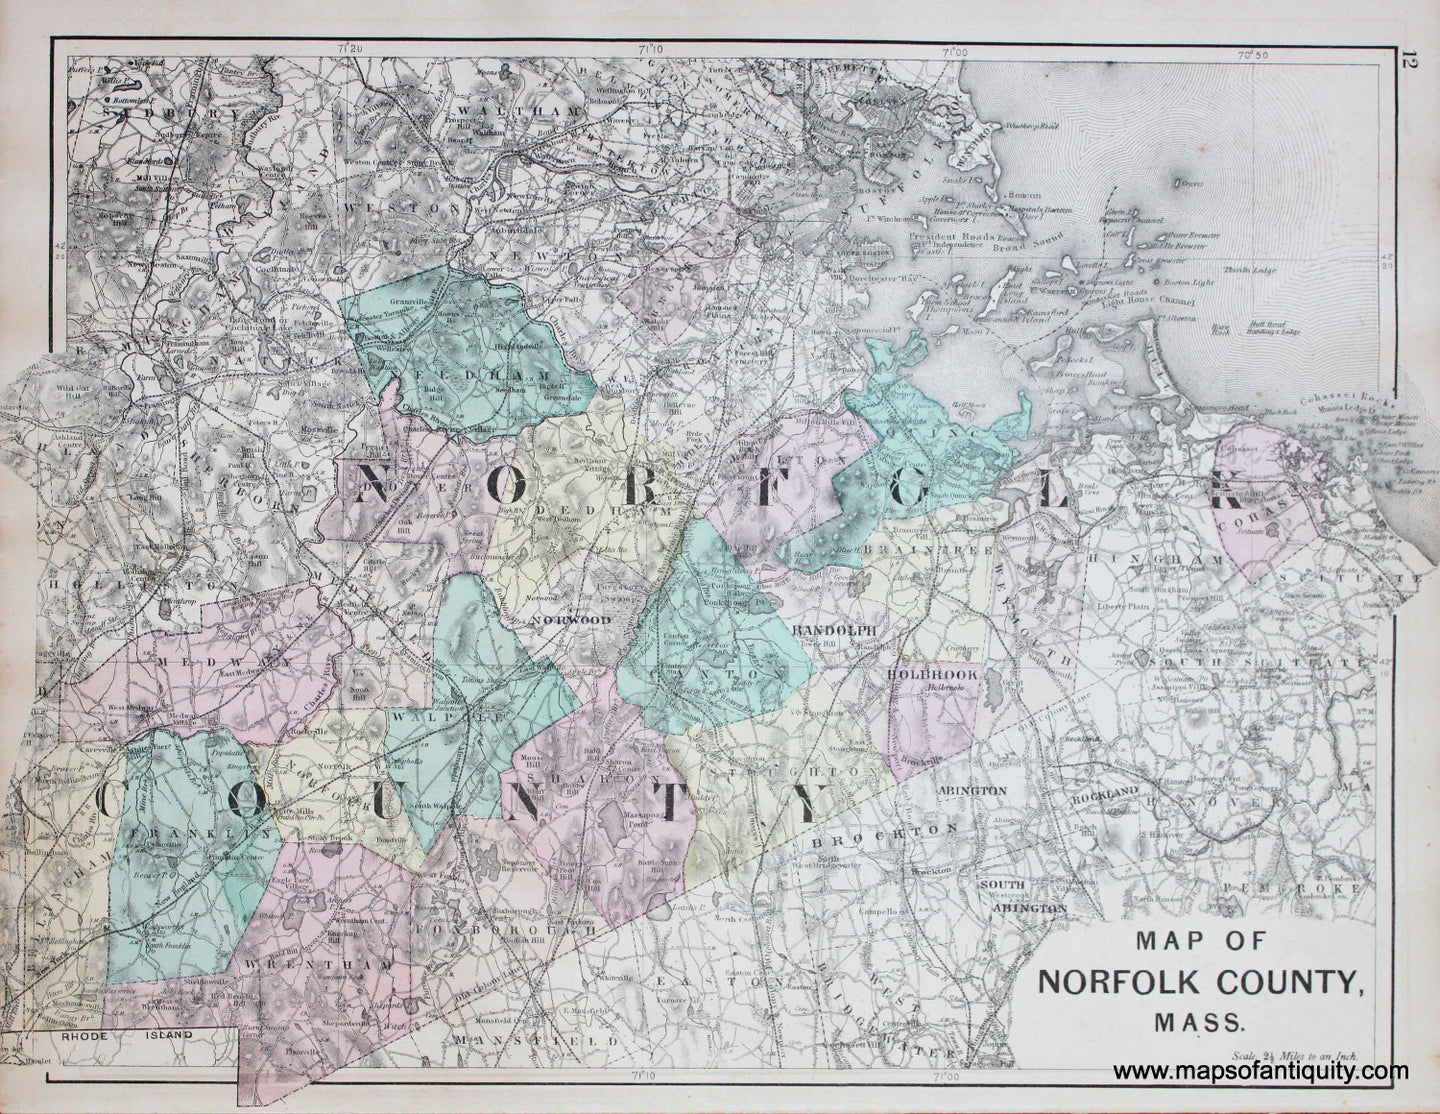 Antique-Hand-Colored-Map-Map-of-Norfolk-County-Mass.-Massachusetts-Norfolk-County-MA-1876-Comstock-&-Cline-Maps-Of-Antiquity